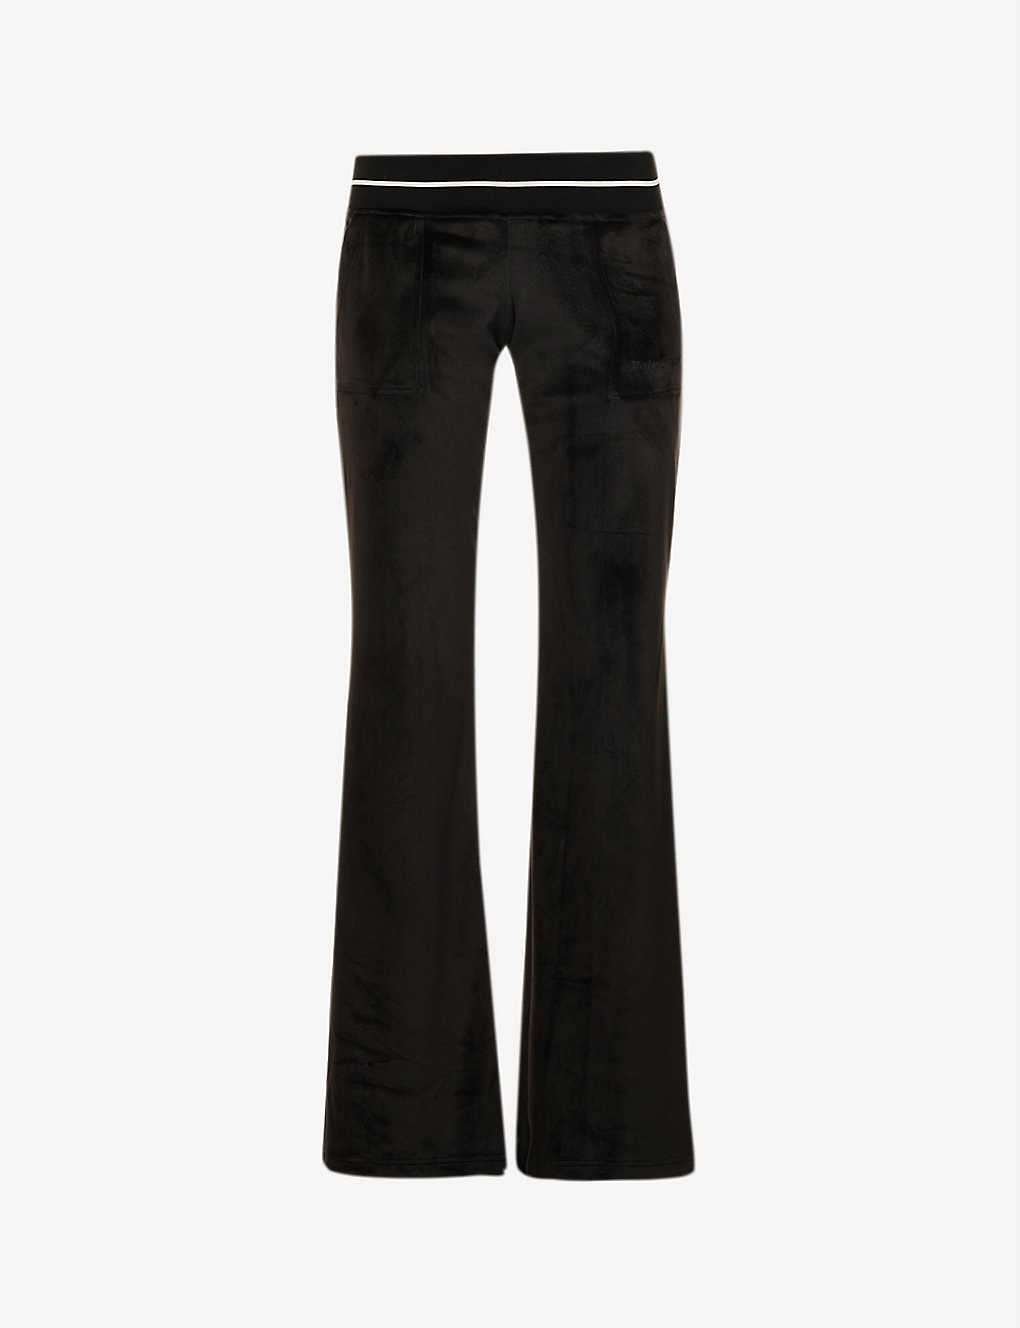 Striped-trim relaxed flared stretch-woven velour trousers Selfridges & Co Women Clothing Pants Stretch Pants 